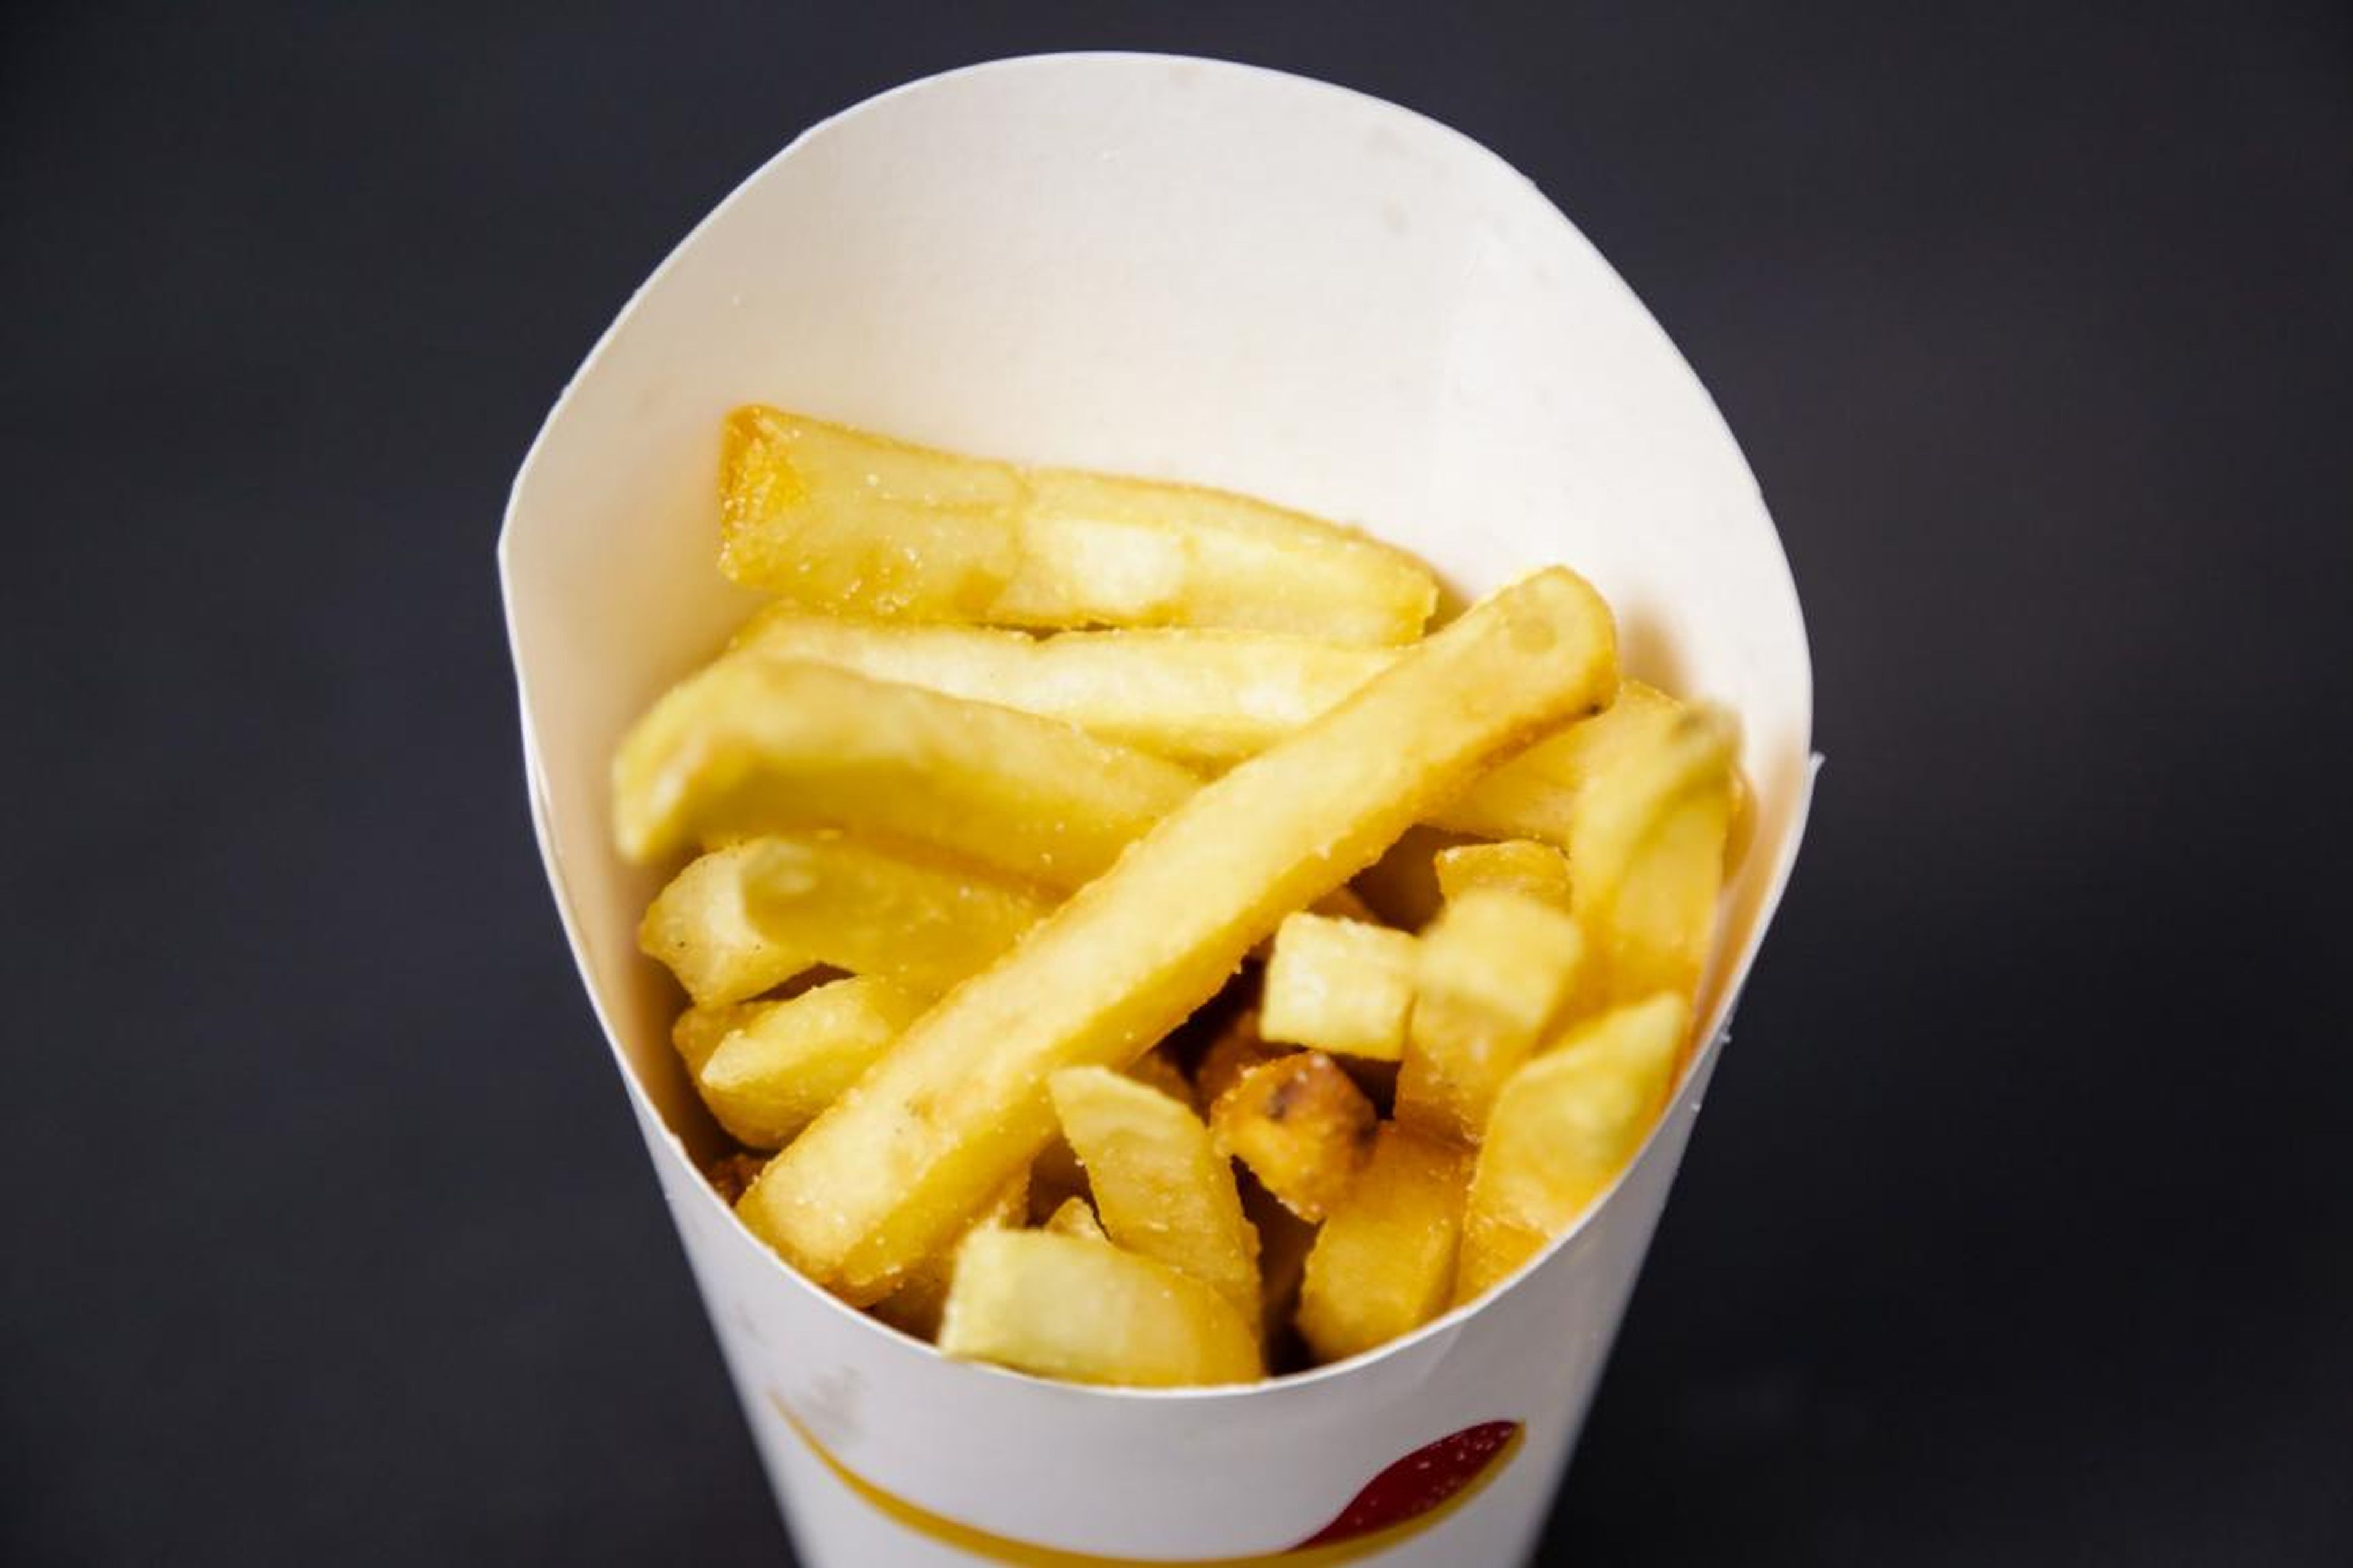 Savory, oily, and rich, BK's fries were the only contestant with zero metallic undertones. They're crispy on the outside and juicy on the inside, though their core is a little gritty and a tad bit too soft. These have just the